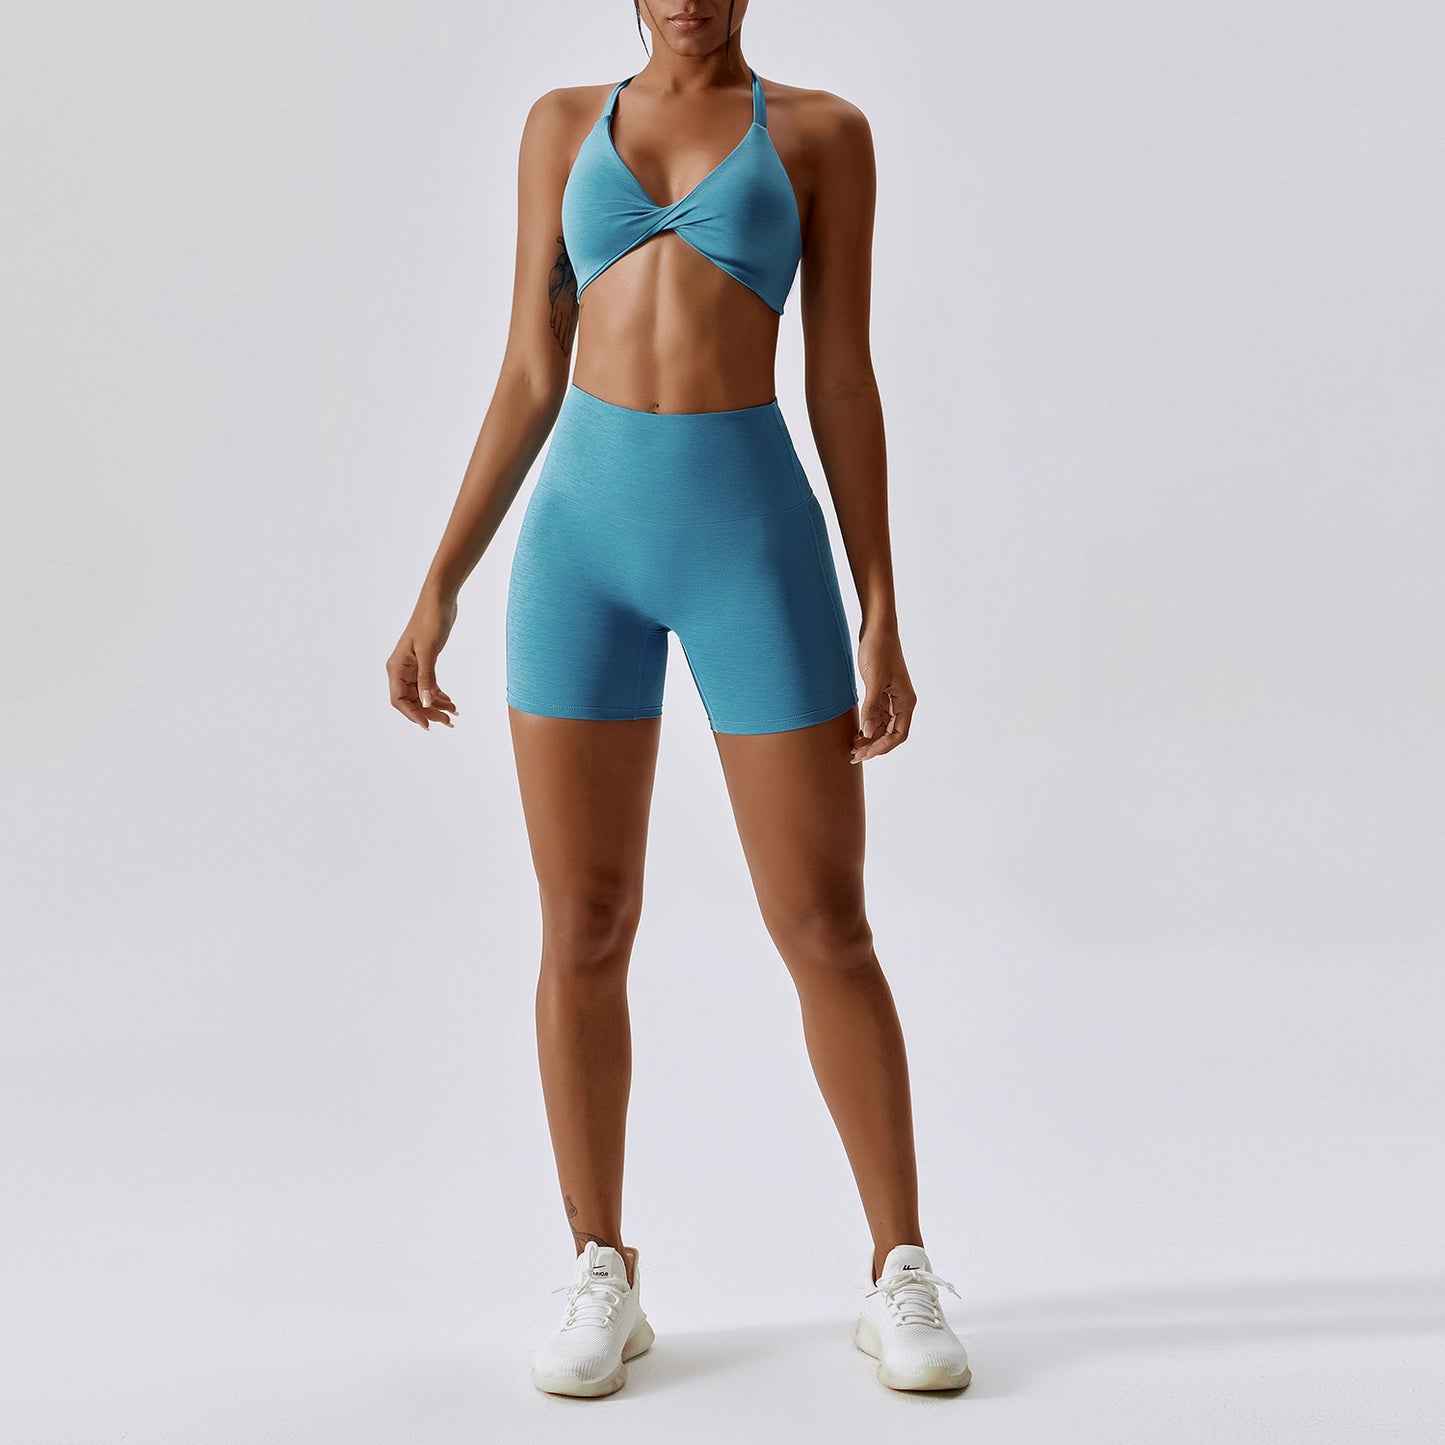 Women's Cycling And Running Fitness Suit